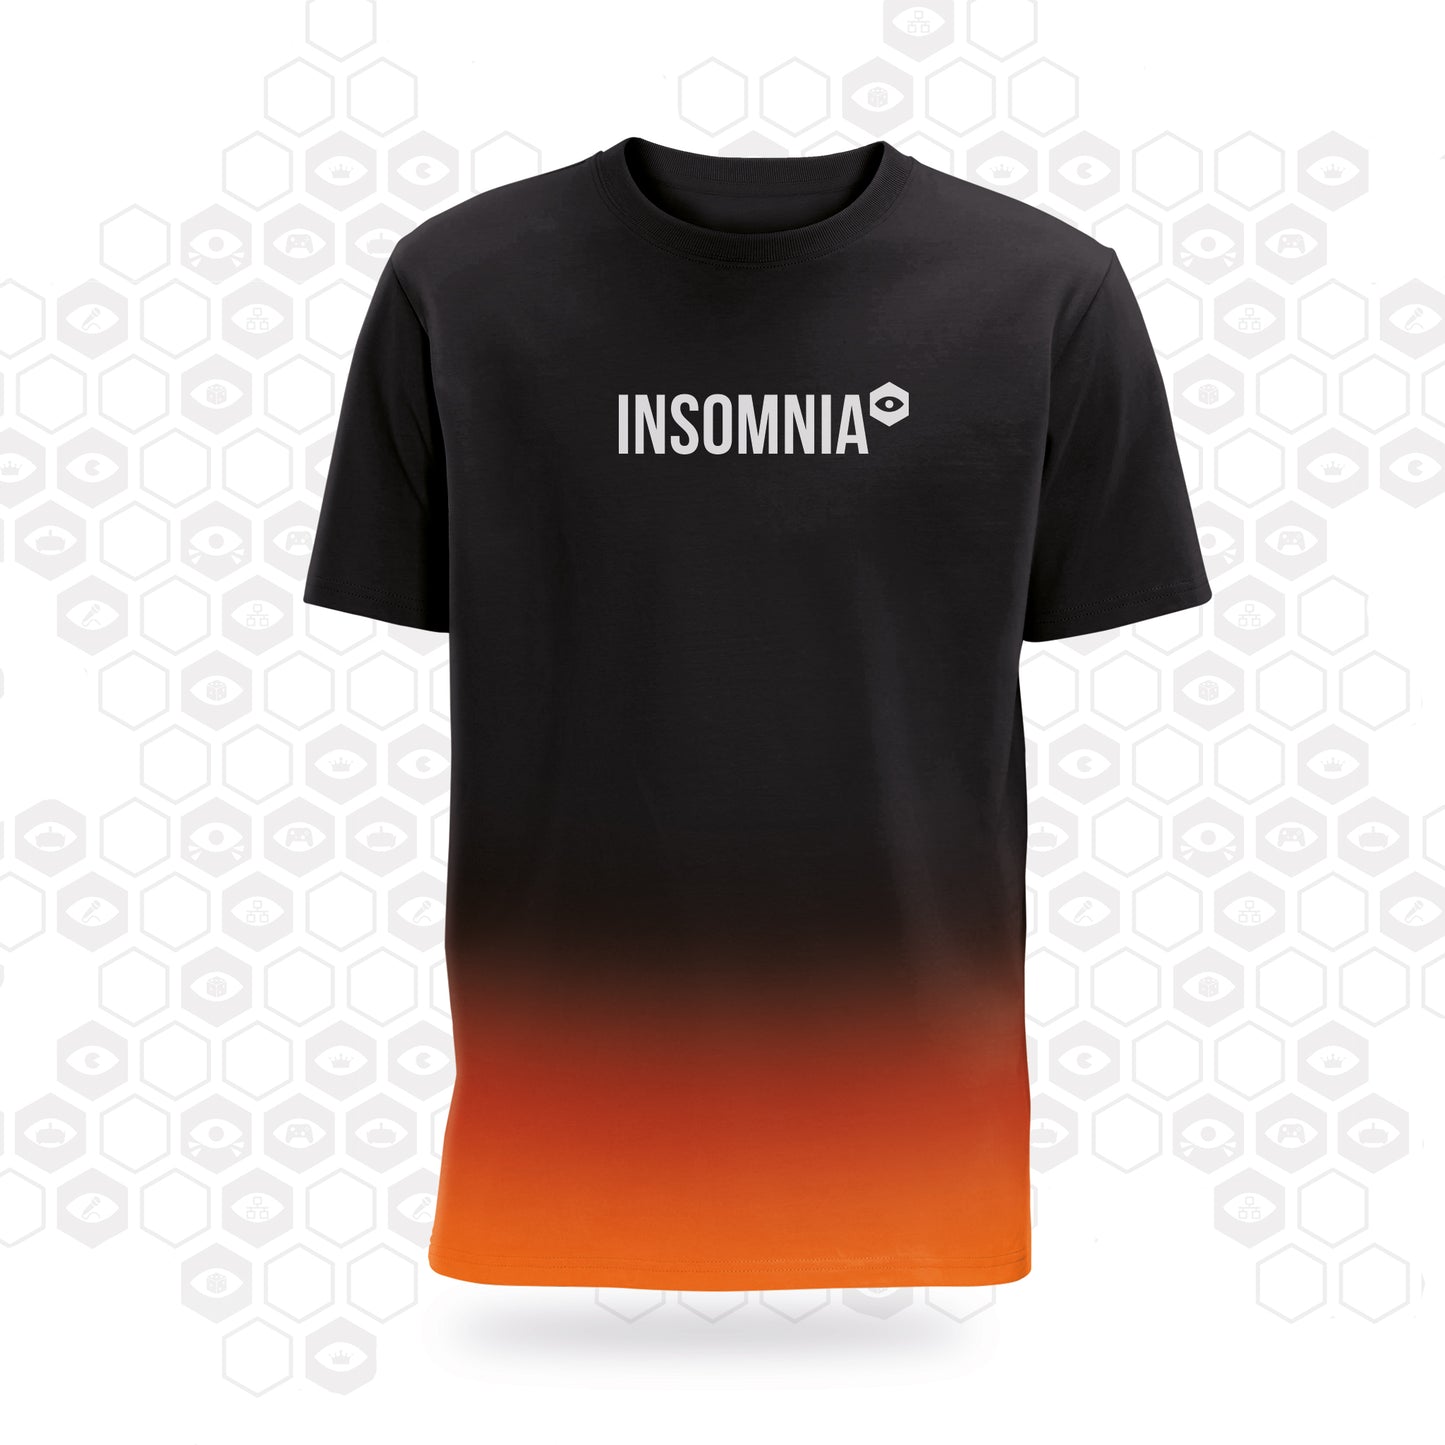 performance t-shirt in black fading to orange at the botton and printed with the insomnia logo across the chest